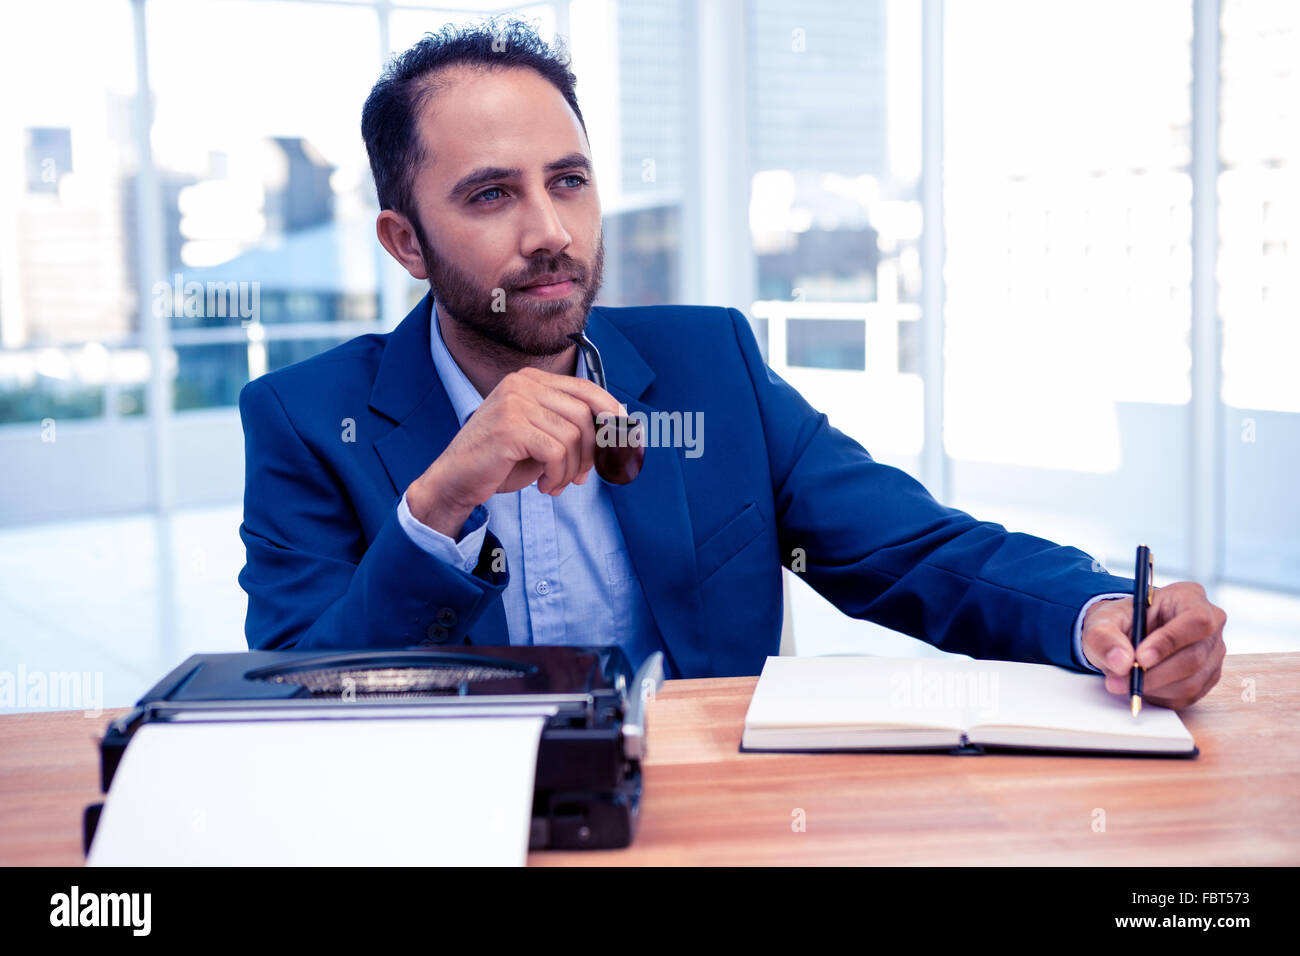 Thoughtful businessman holding pen while sitting at desk Stock Photo